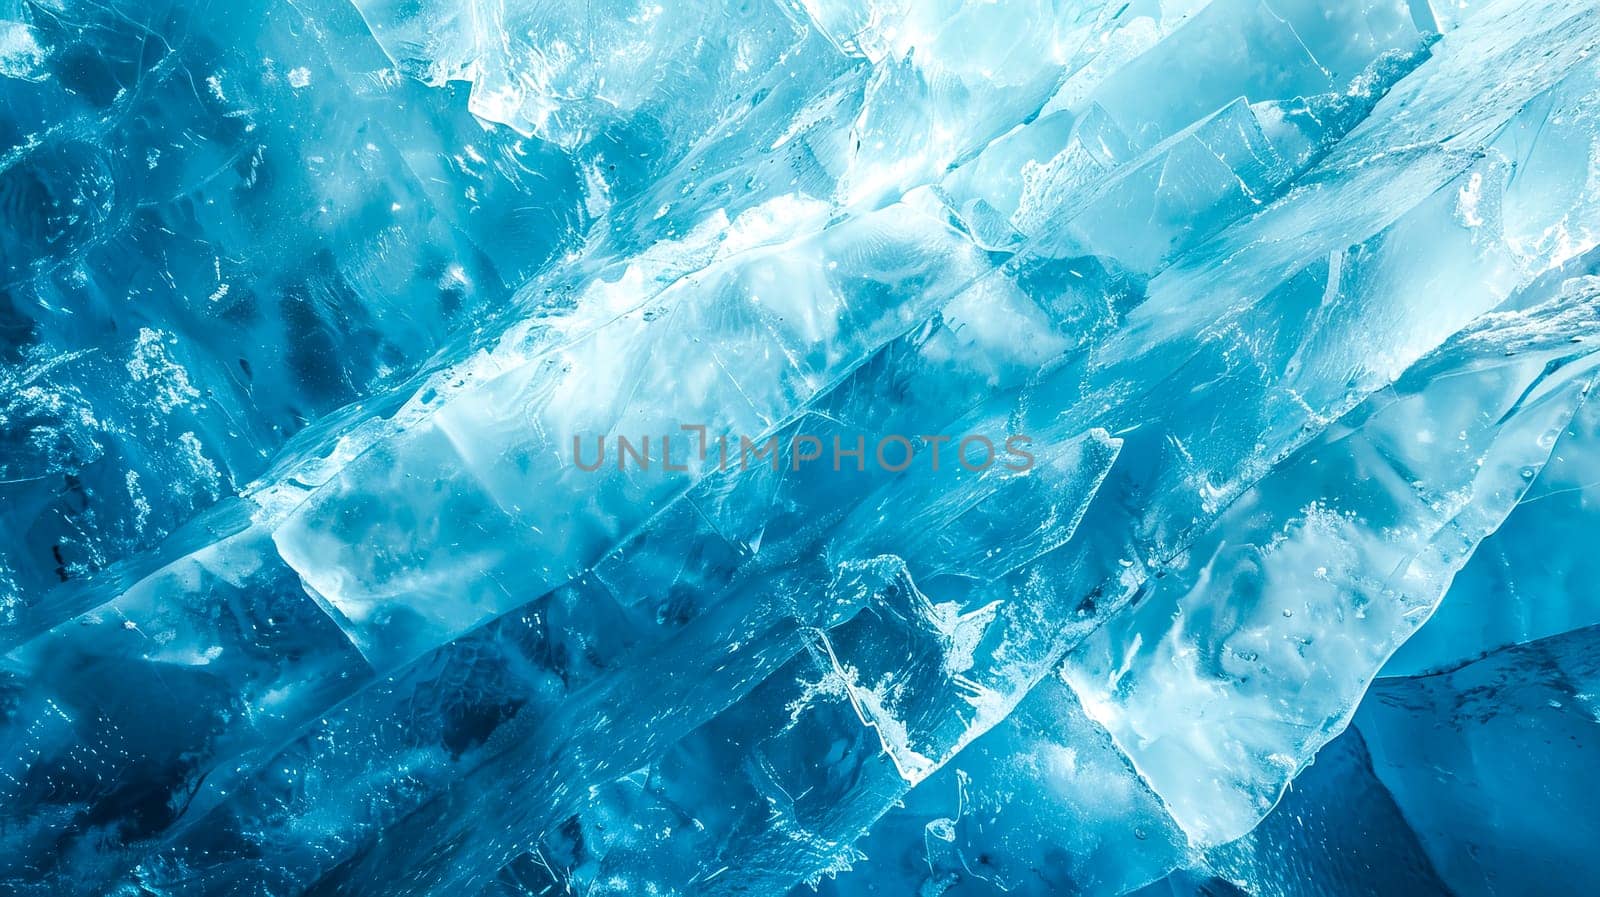 High-definition image showcasing the intricate textures of blue ice by Edophoto